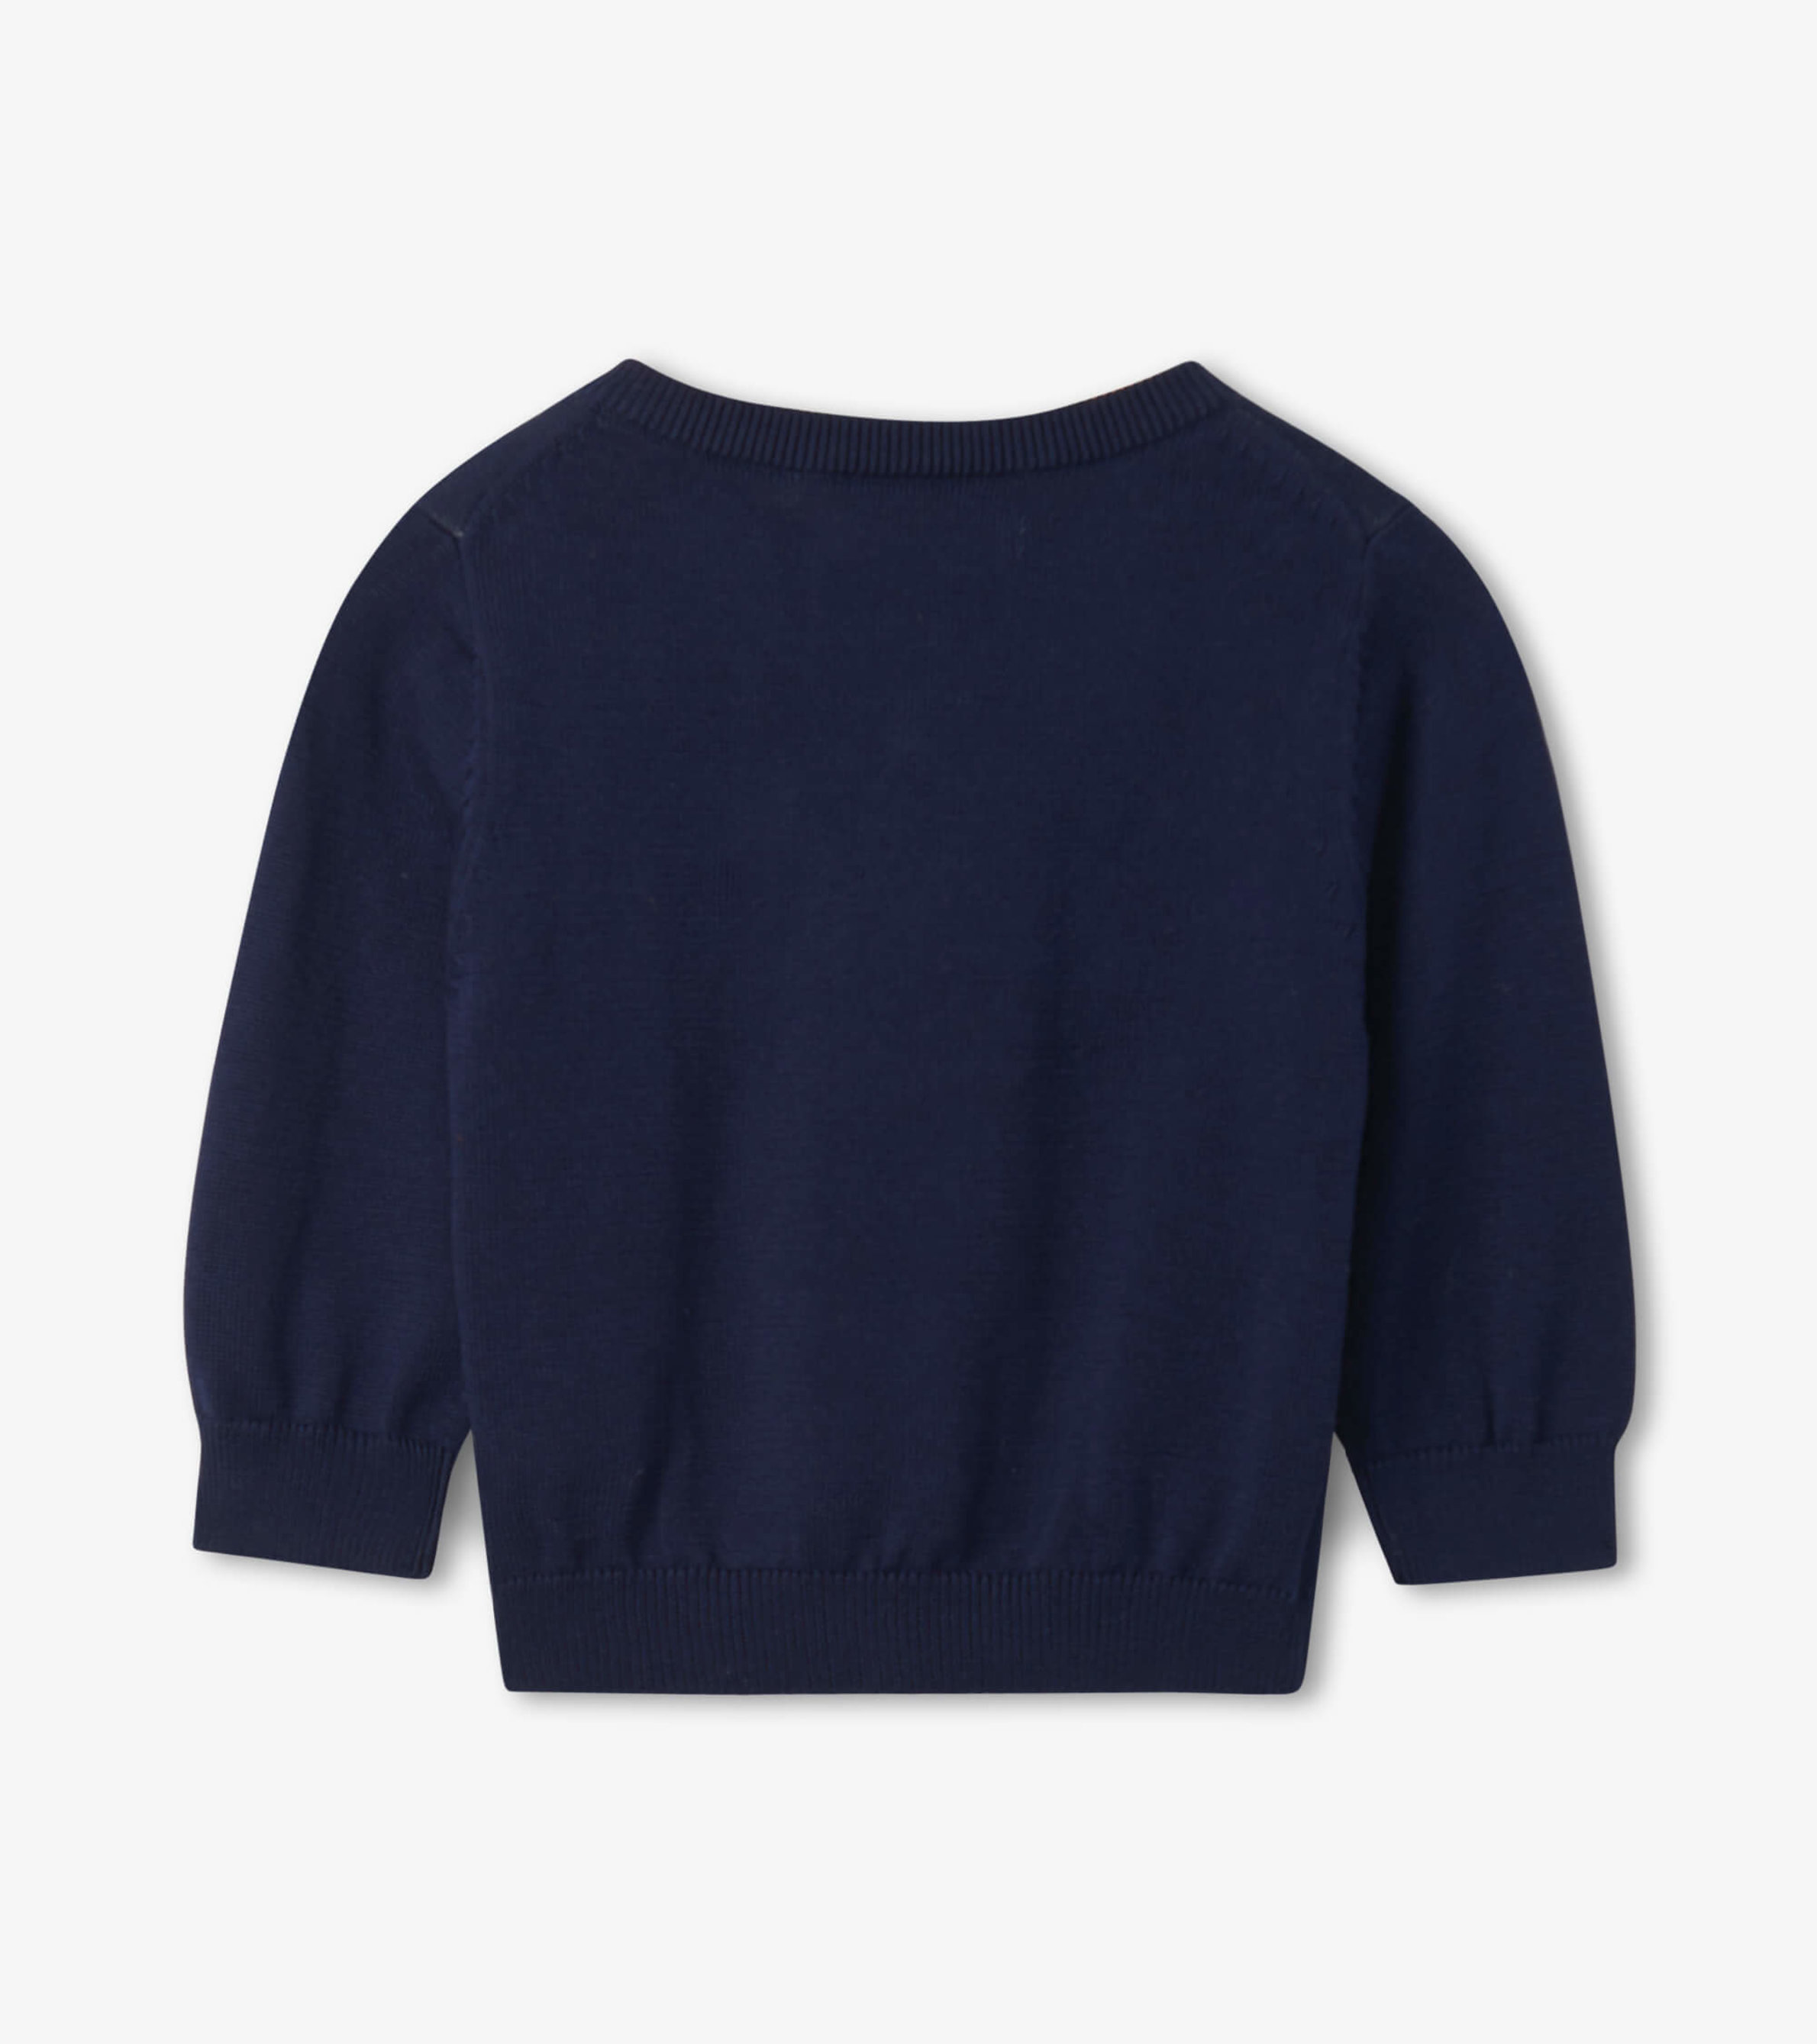 Clever Sweater - Hatley US